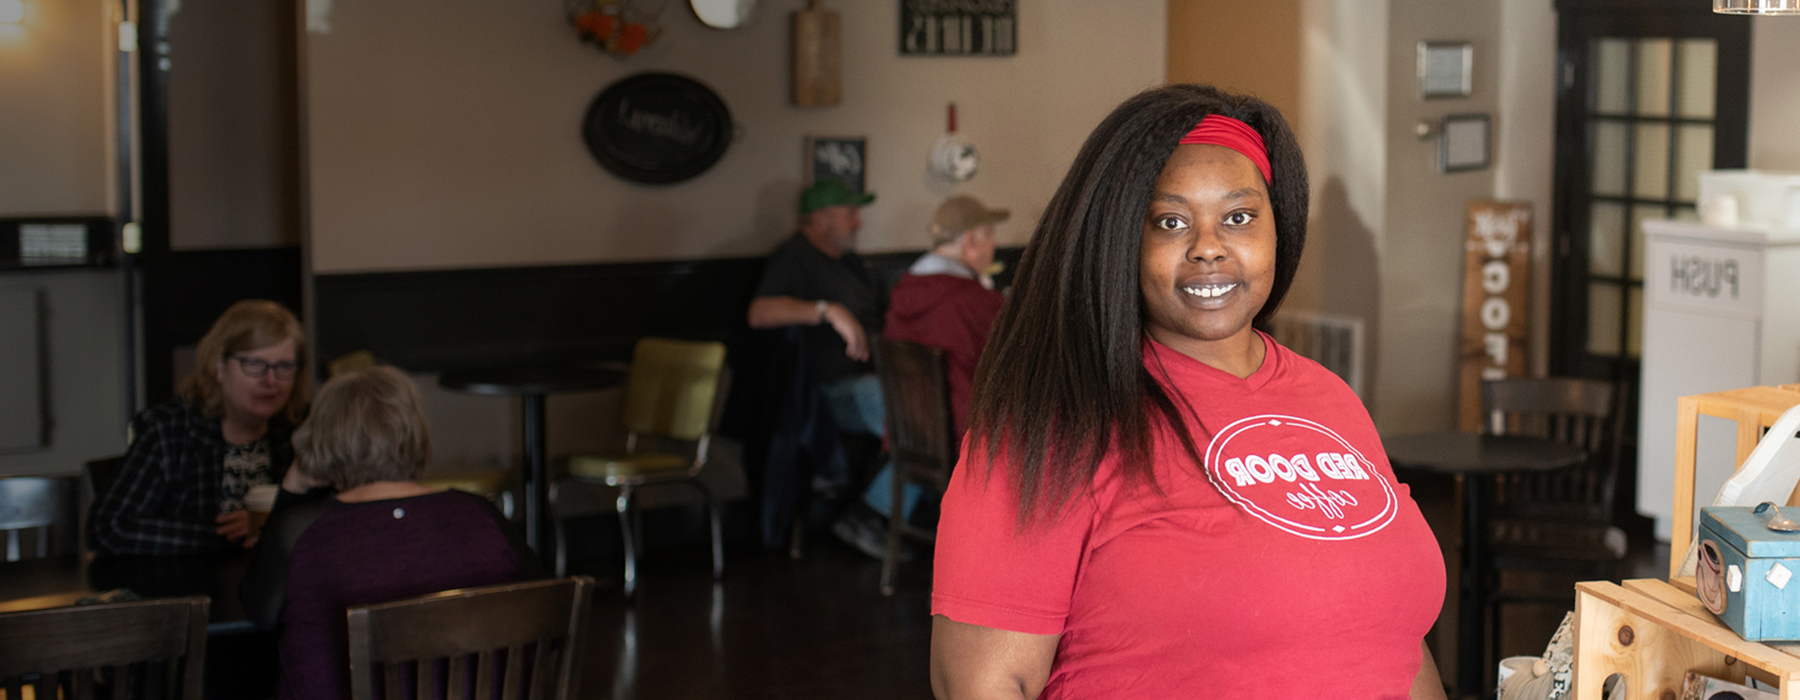 Woman in red shirt stands in coffee shop